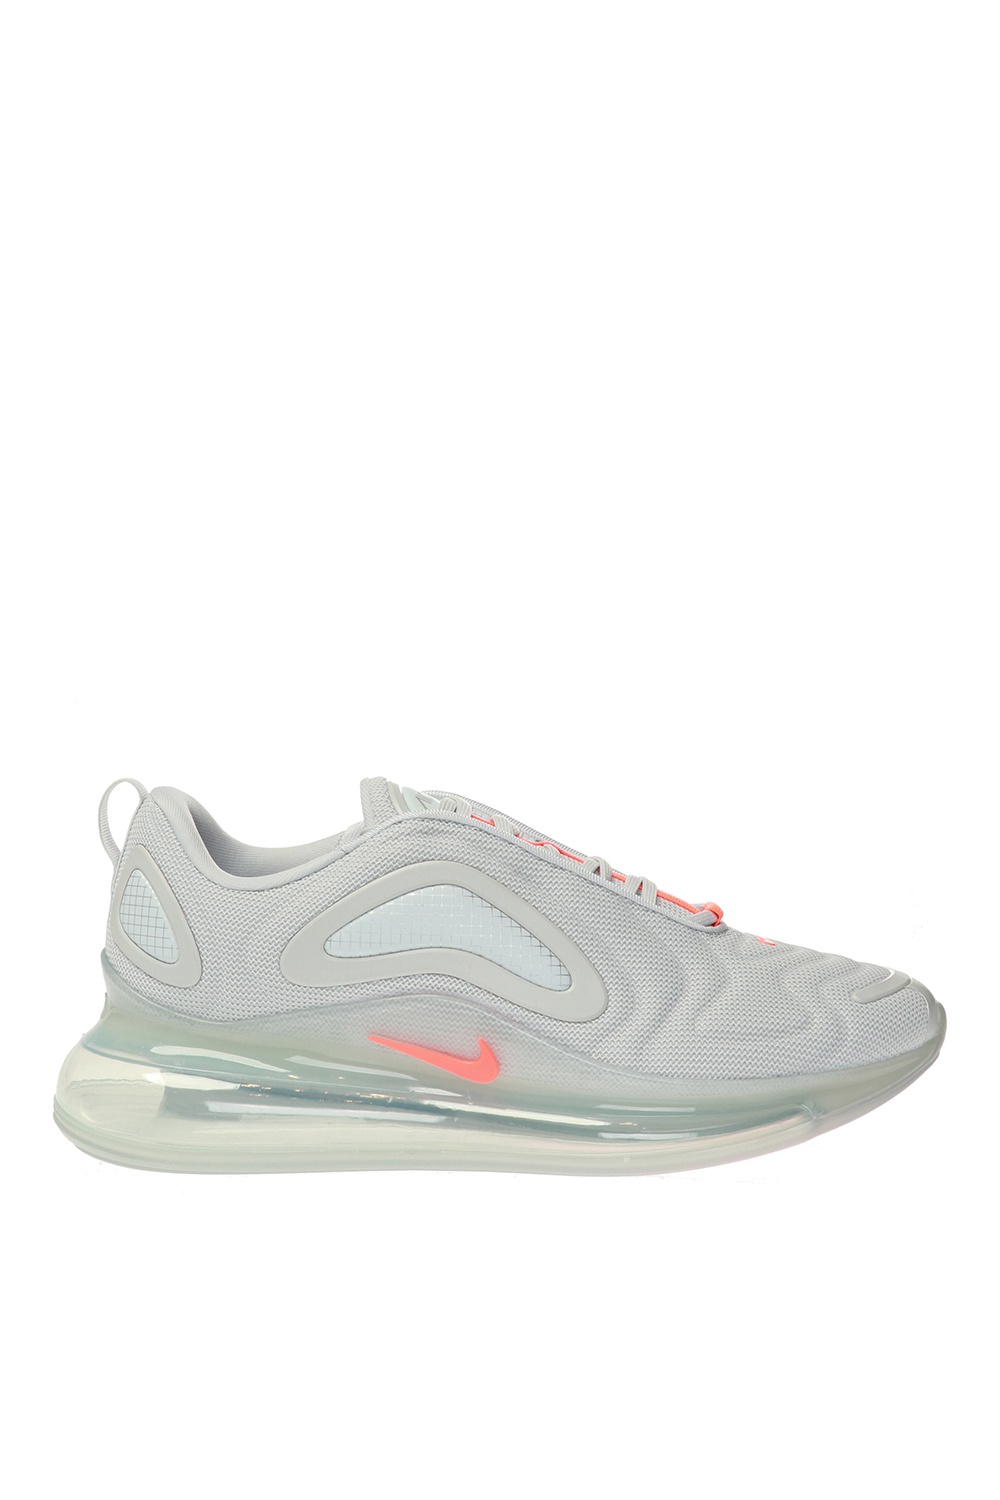 nike air max 720 size guide